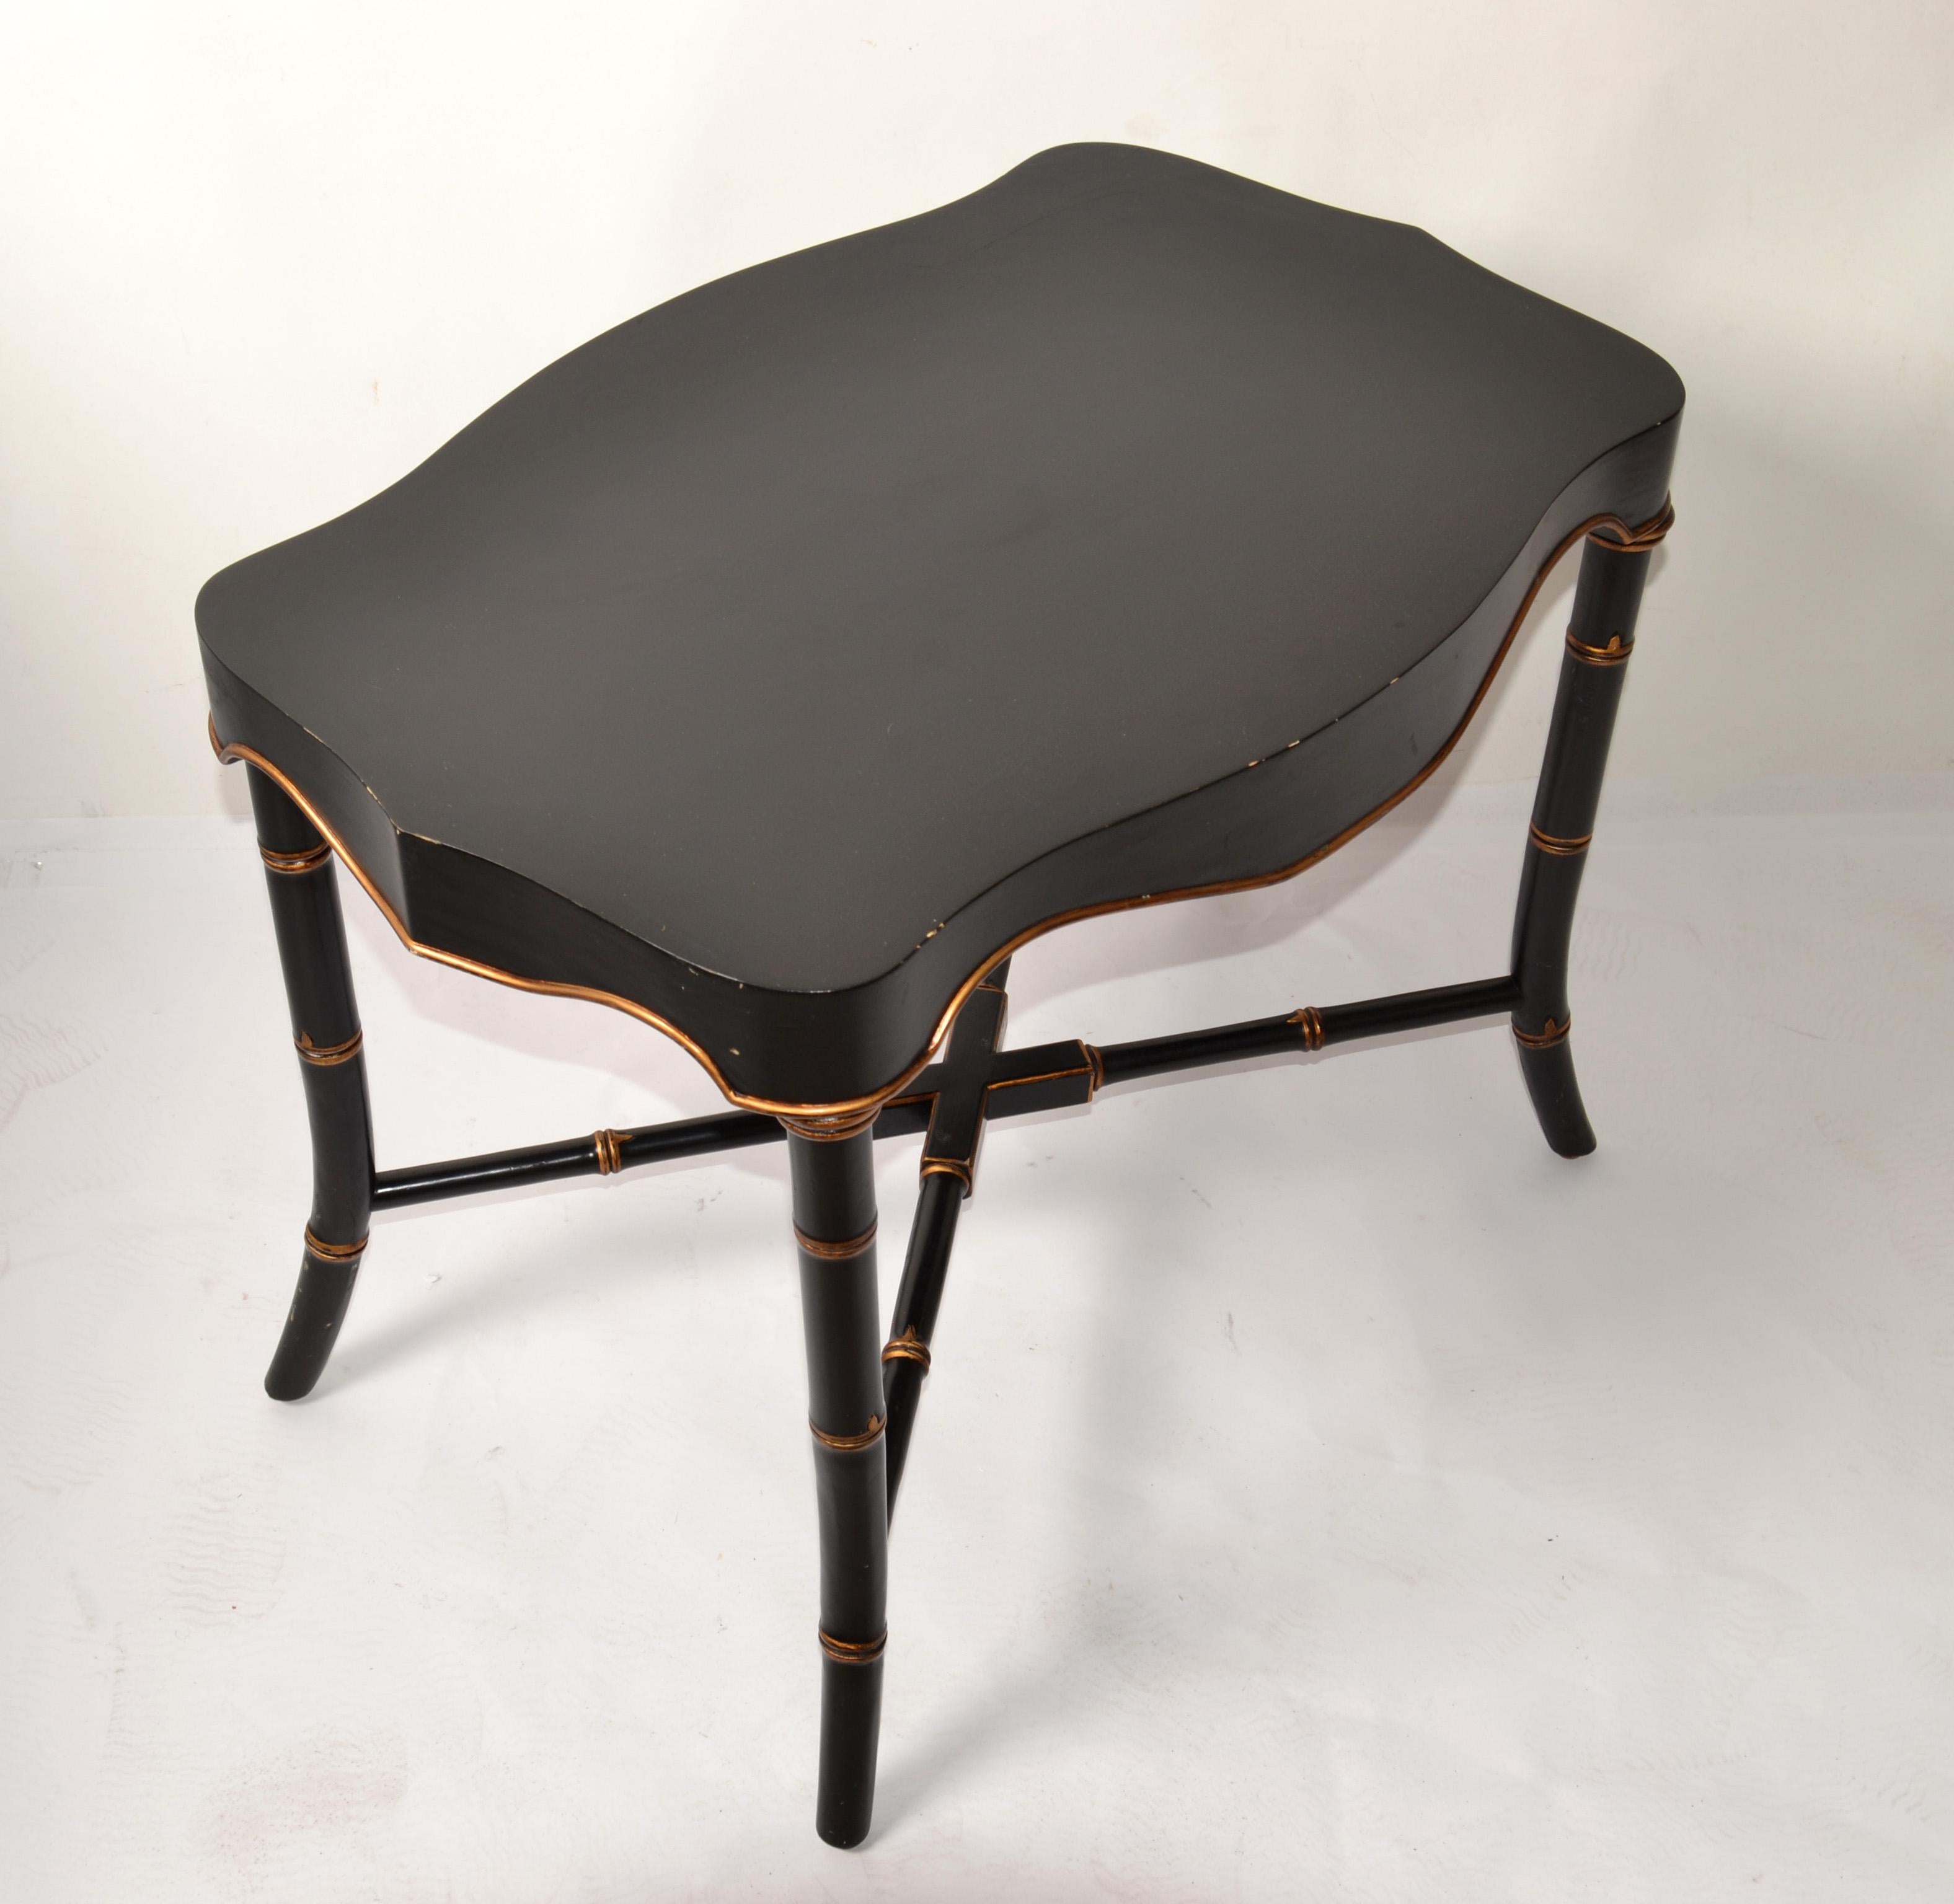 Victorian Mid-20th Century Black Gold Finish Accent Table Faux Bamboo Cross Base For Sale 5